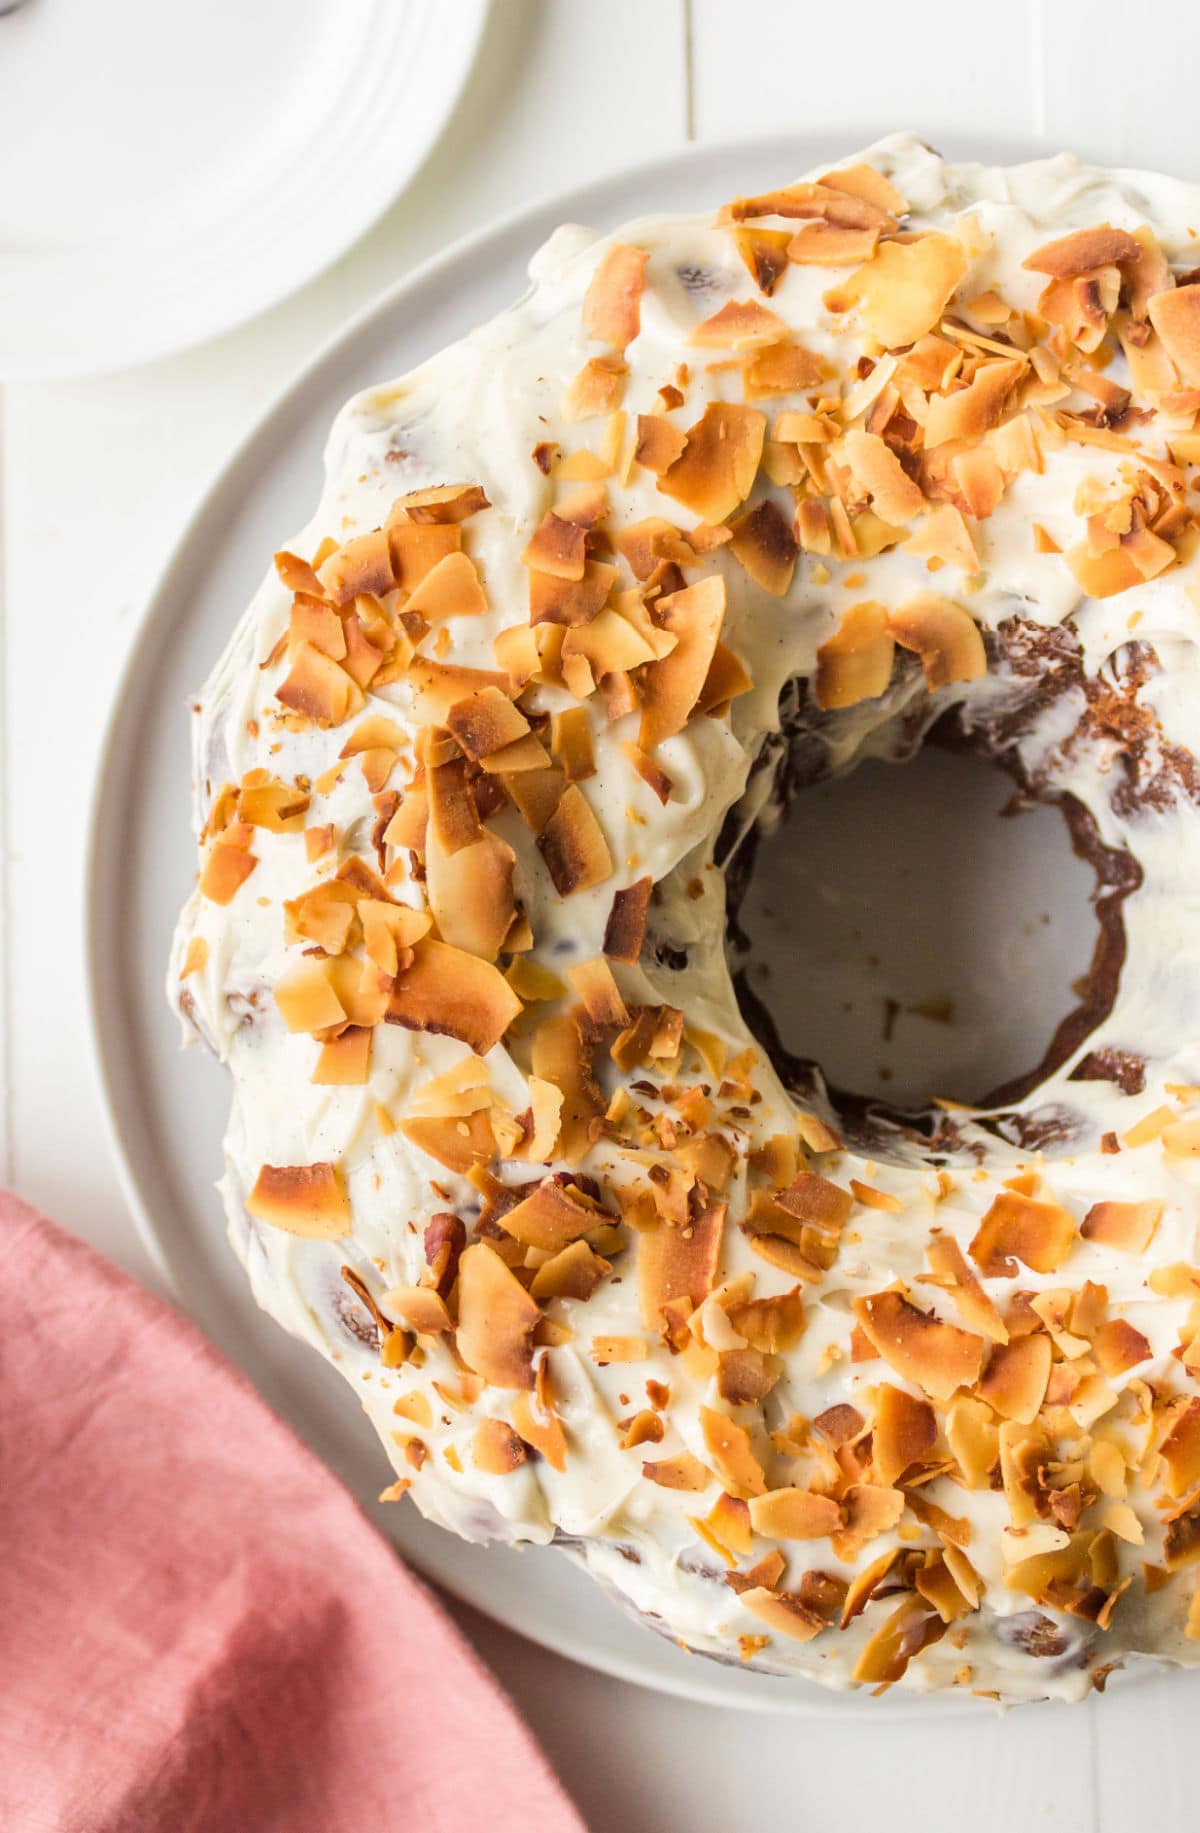 Hummingbird bundt cake topped with cream cheese frosting and toasted coconut.